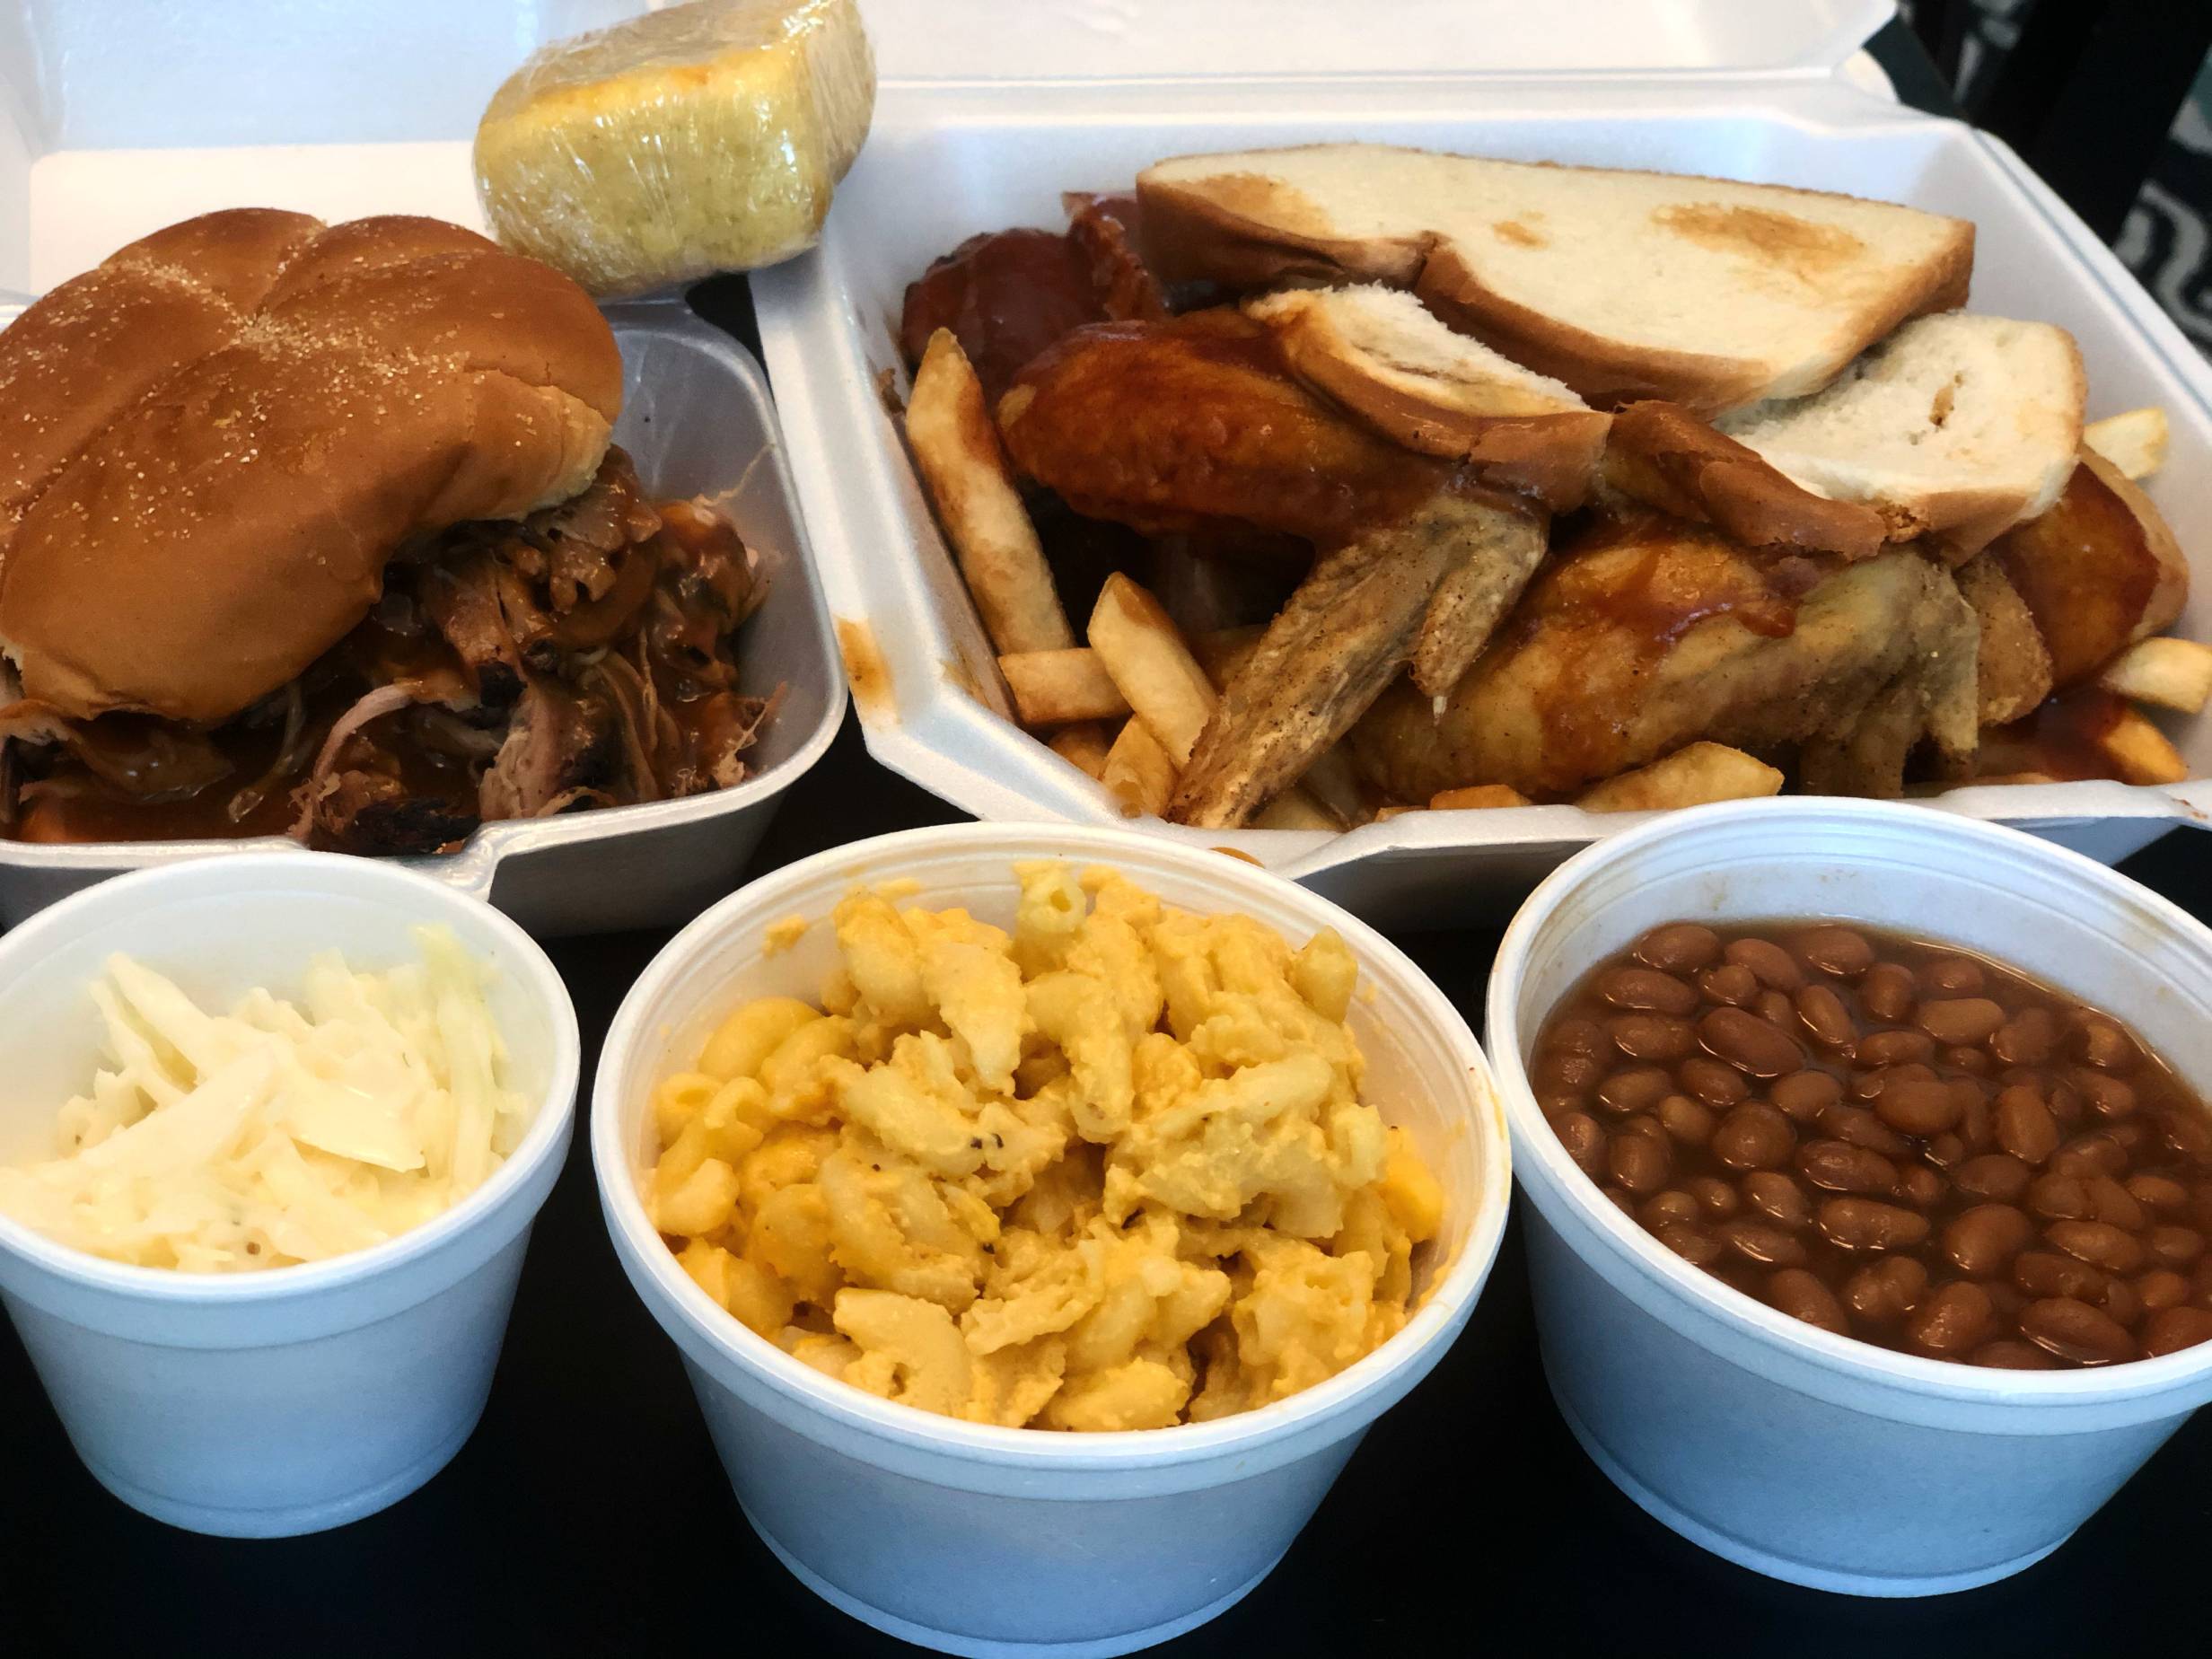 Several styrofoam containers sit open on a black table with a pulled pork sandwich, a ribs and wings combo, coleslaw, macaroni, and baked beans. Photo by Alyssa Buckley.